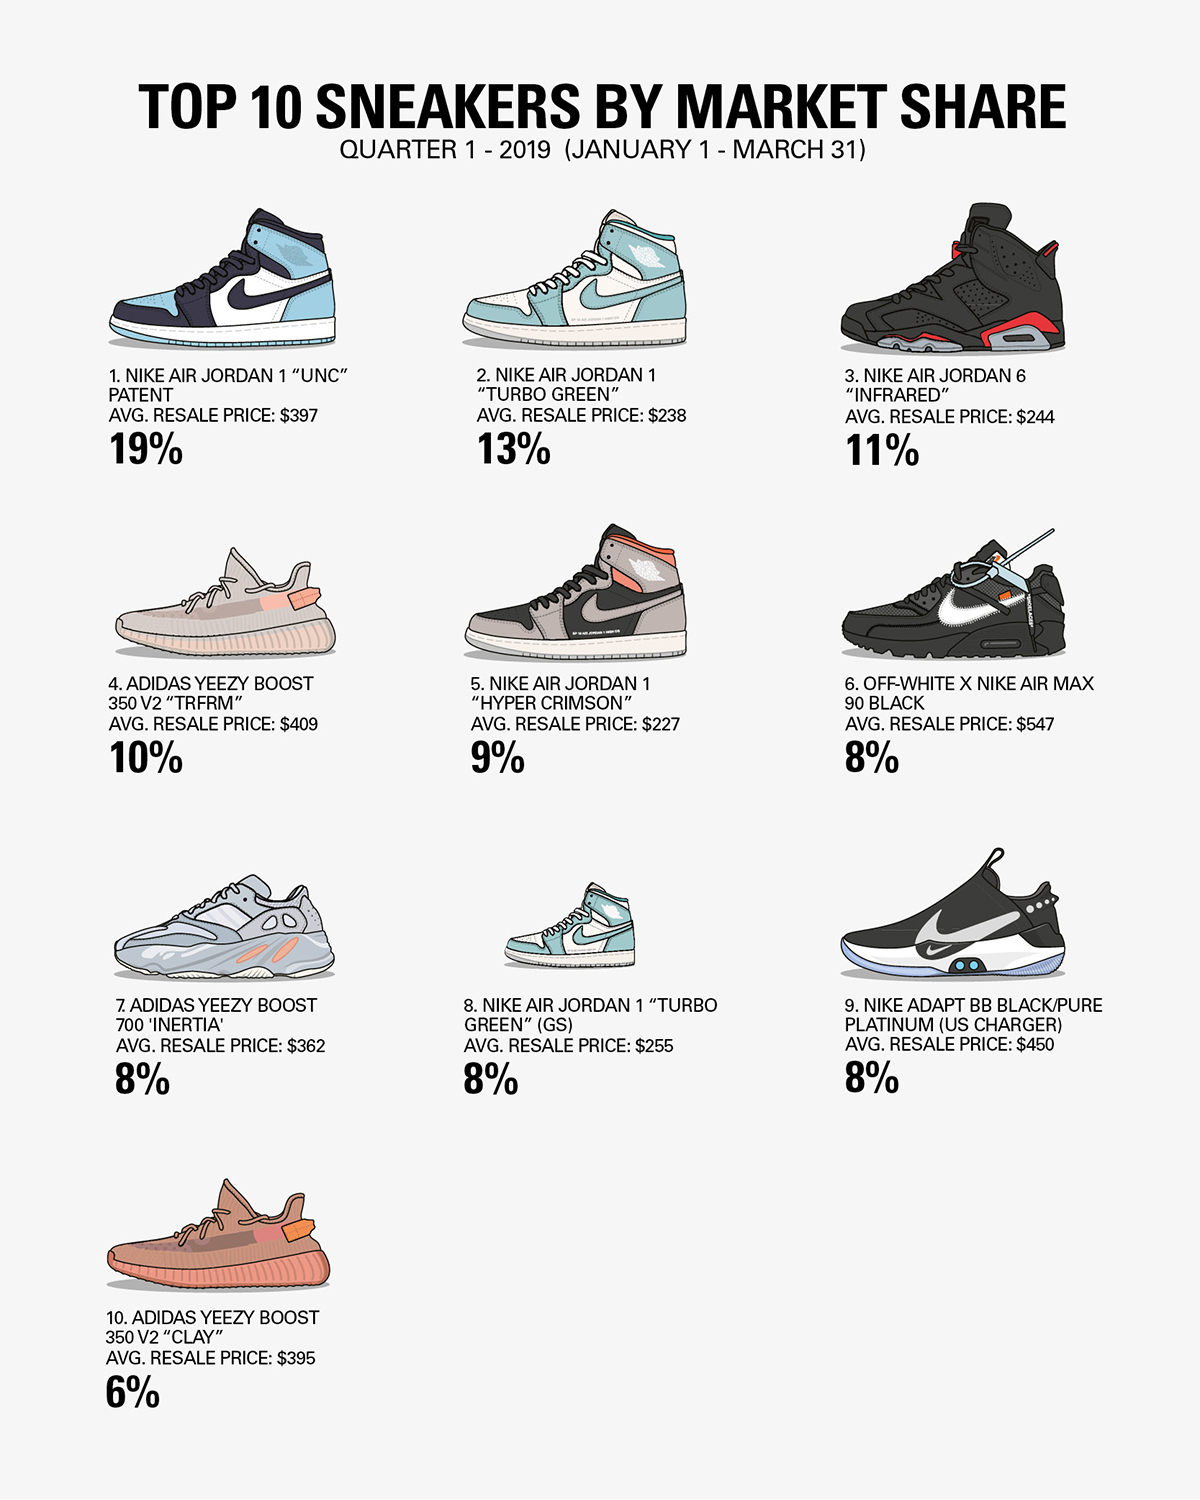 Most Expensive Sneakers Sold by Resale in Last Year